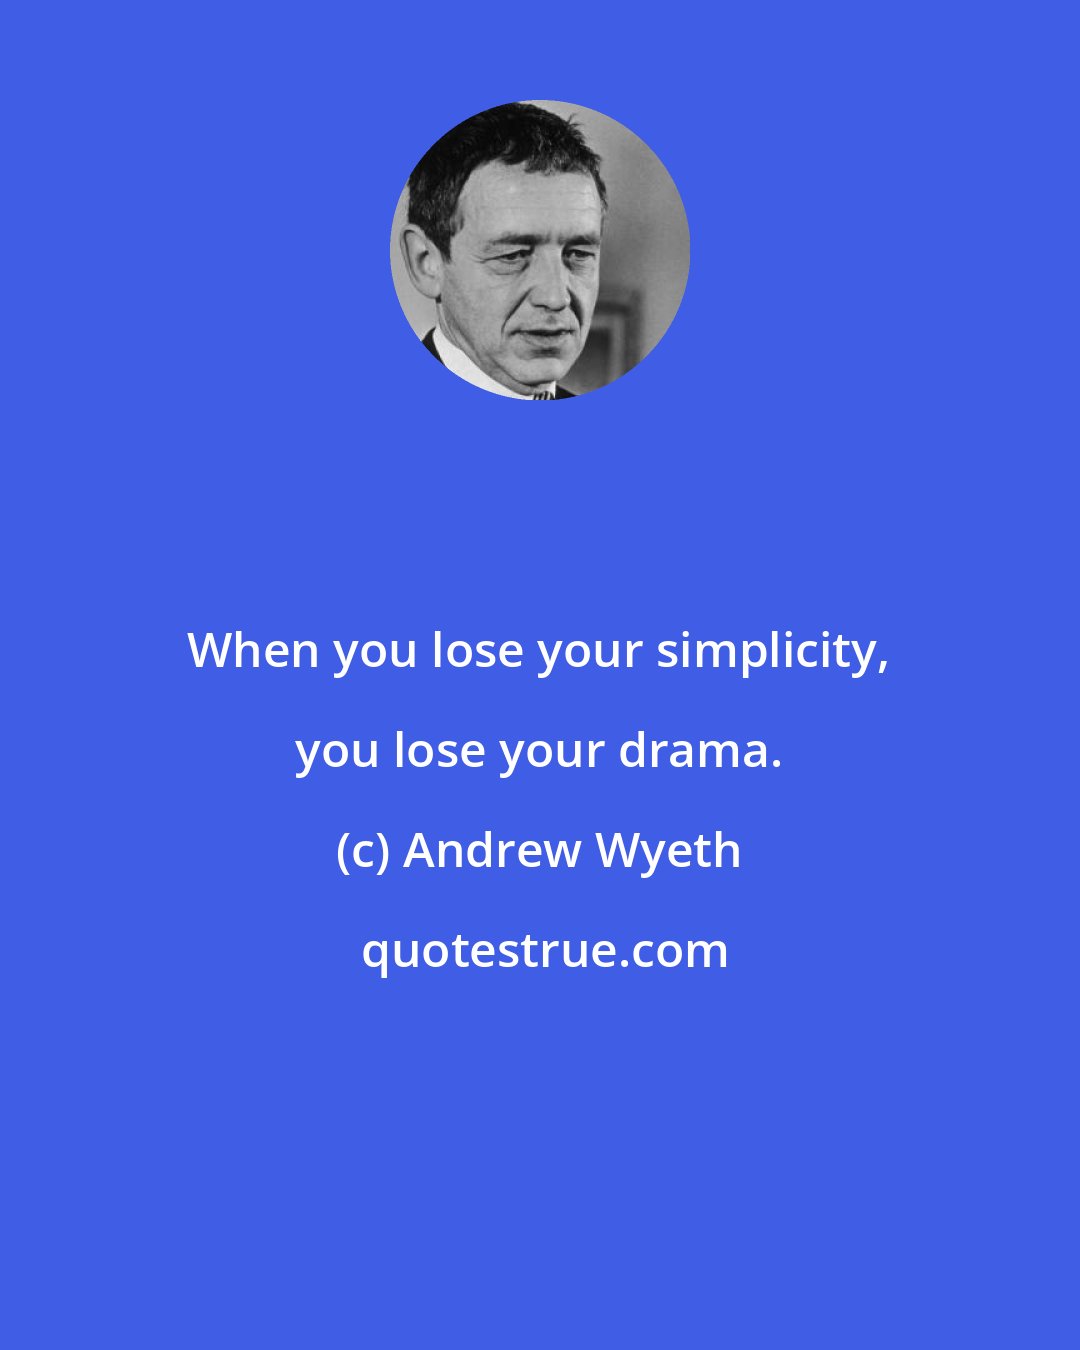 Andrew Wyeth: When you lose your simplicity, you lose your drama.